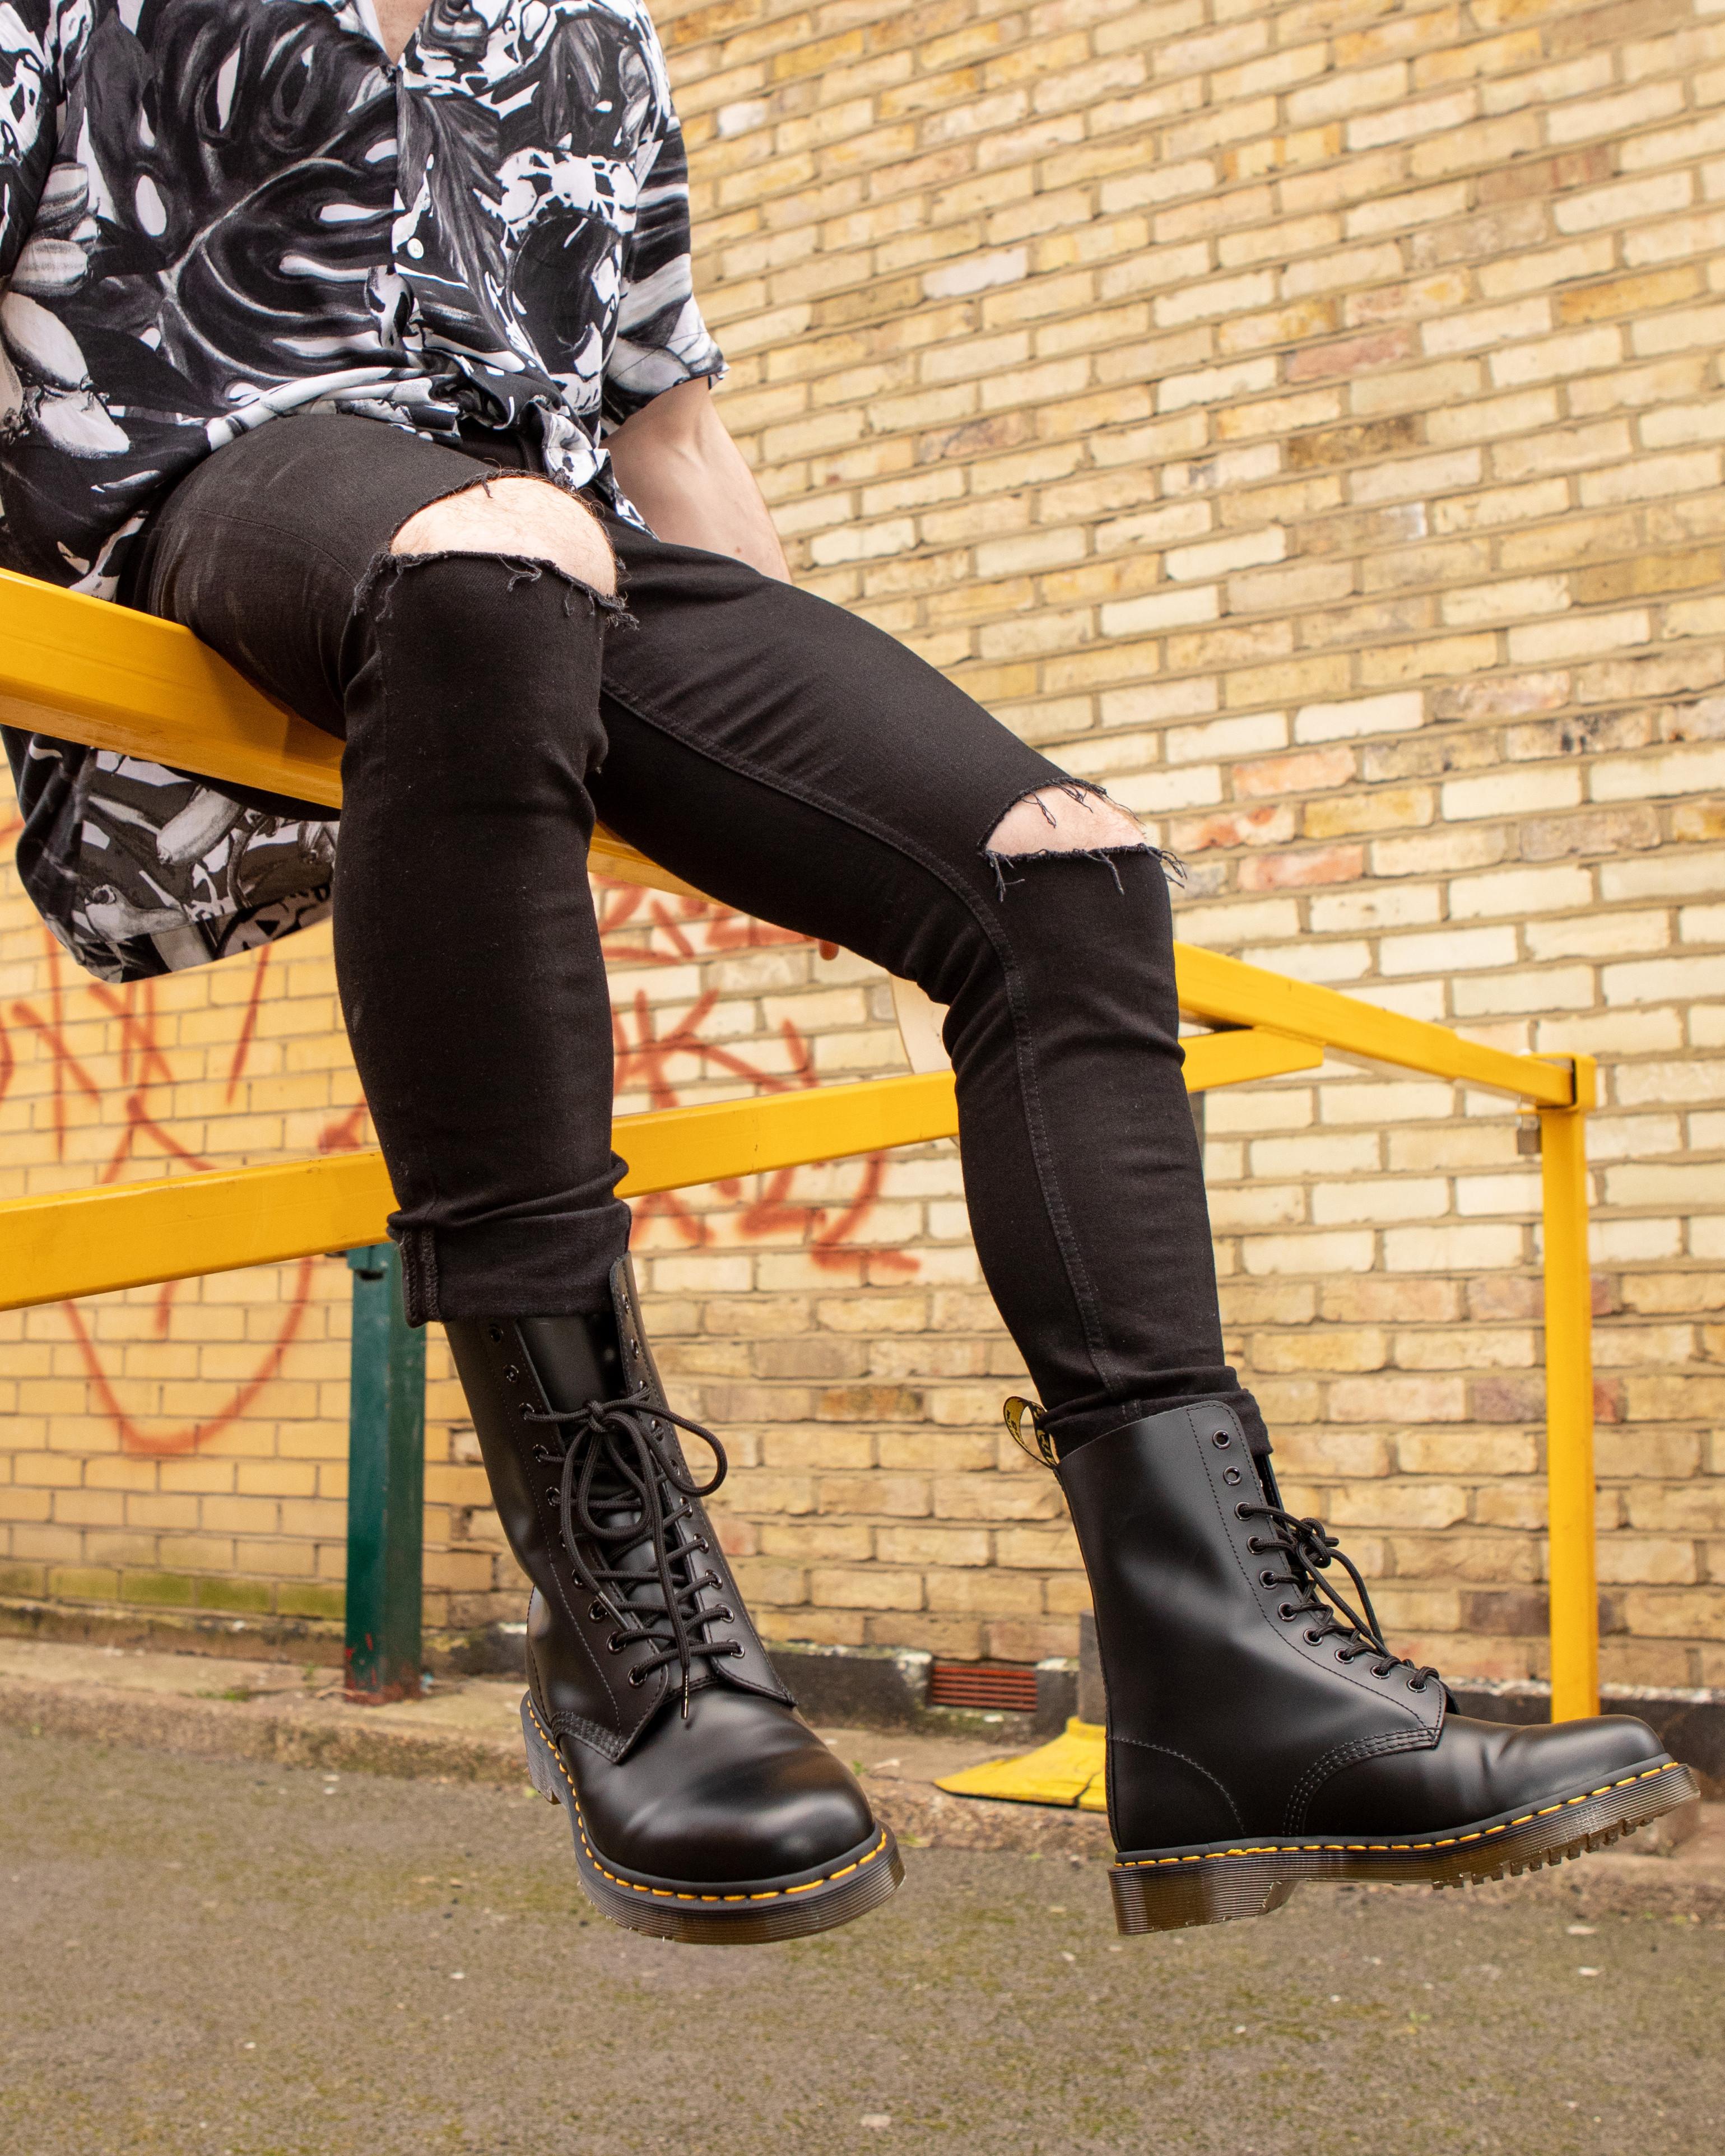 1490 Smooth Leather Mid Calf Boots | Dr. Martens